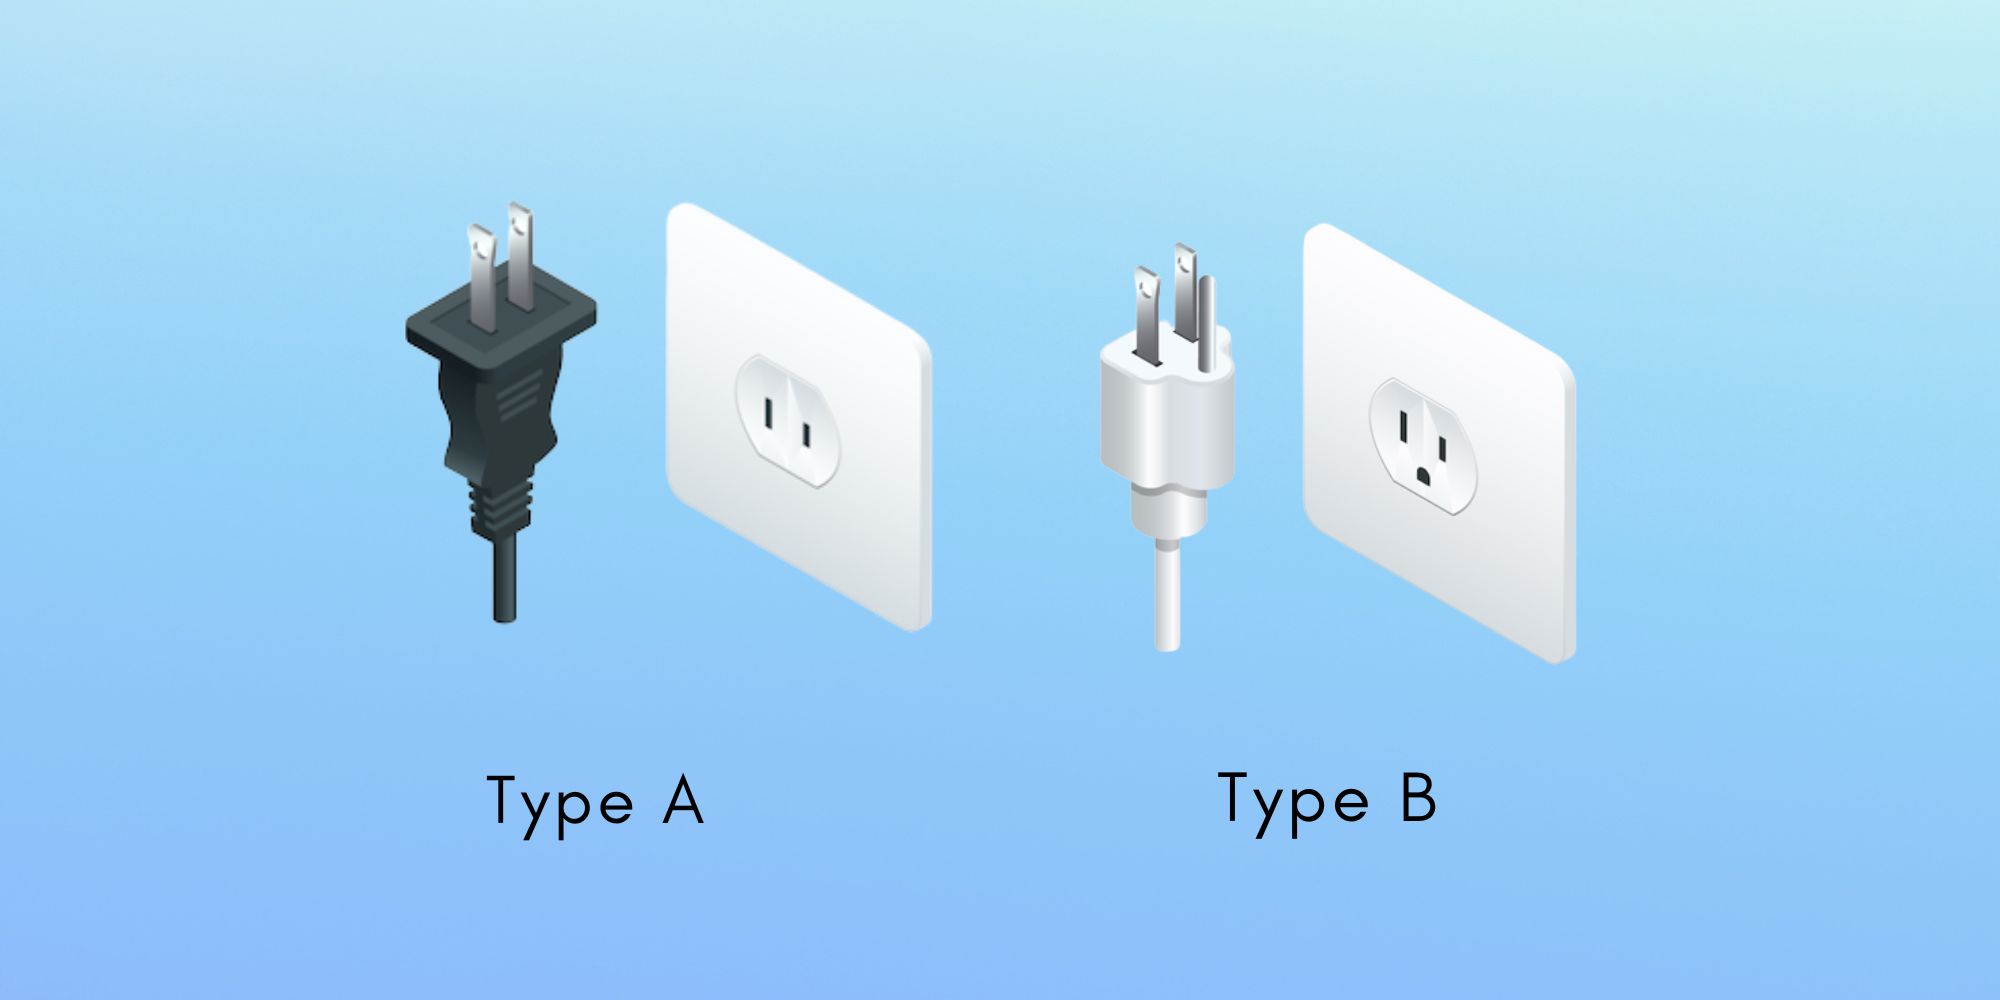 Taiwan Power Plugs and Sockets: Type A and Type B
